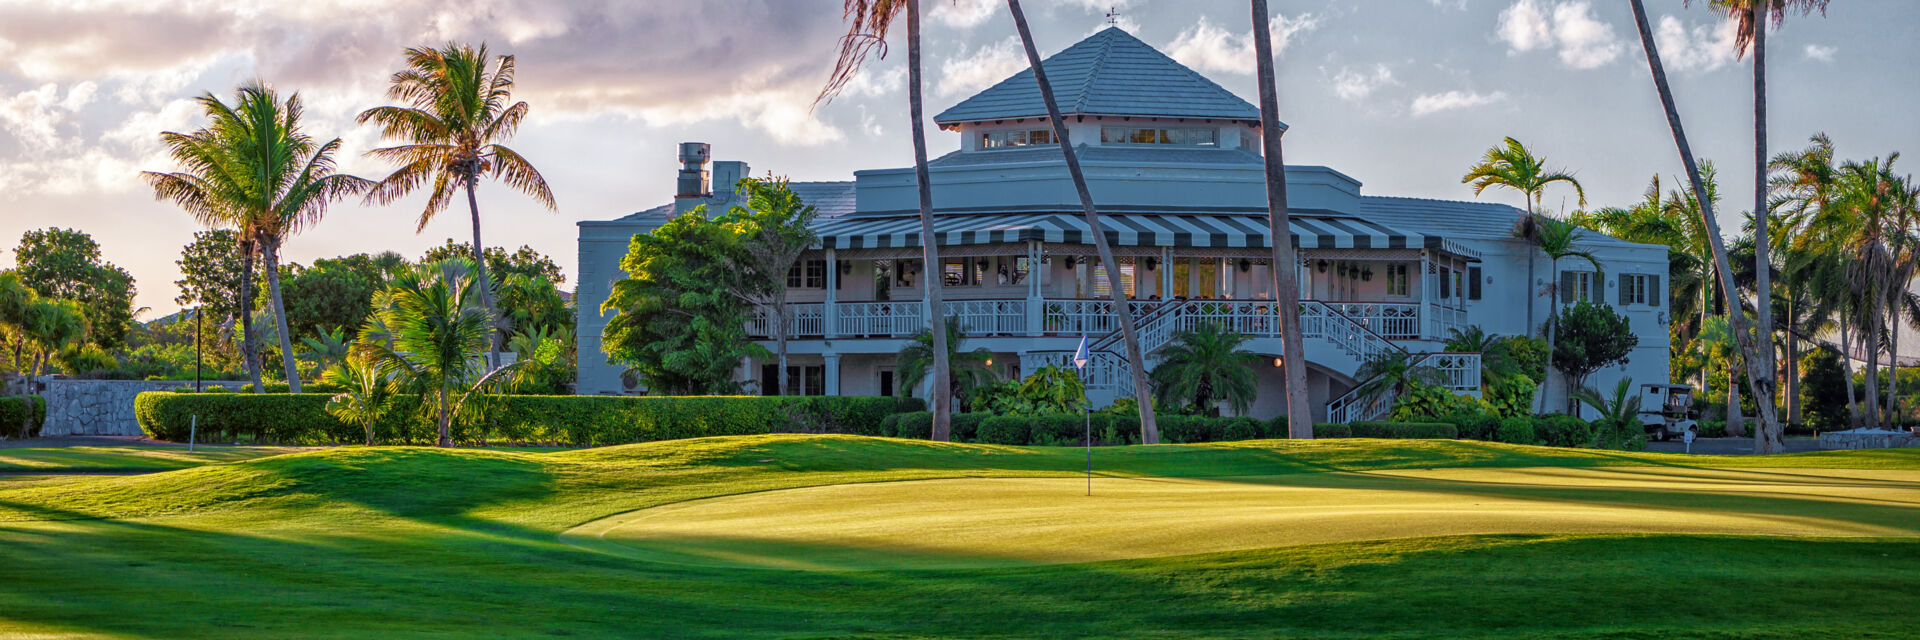 Golfing in Turks and Caicos | Visit Turks and Caicos Islands